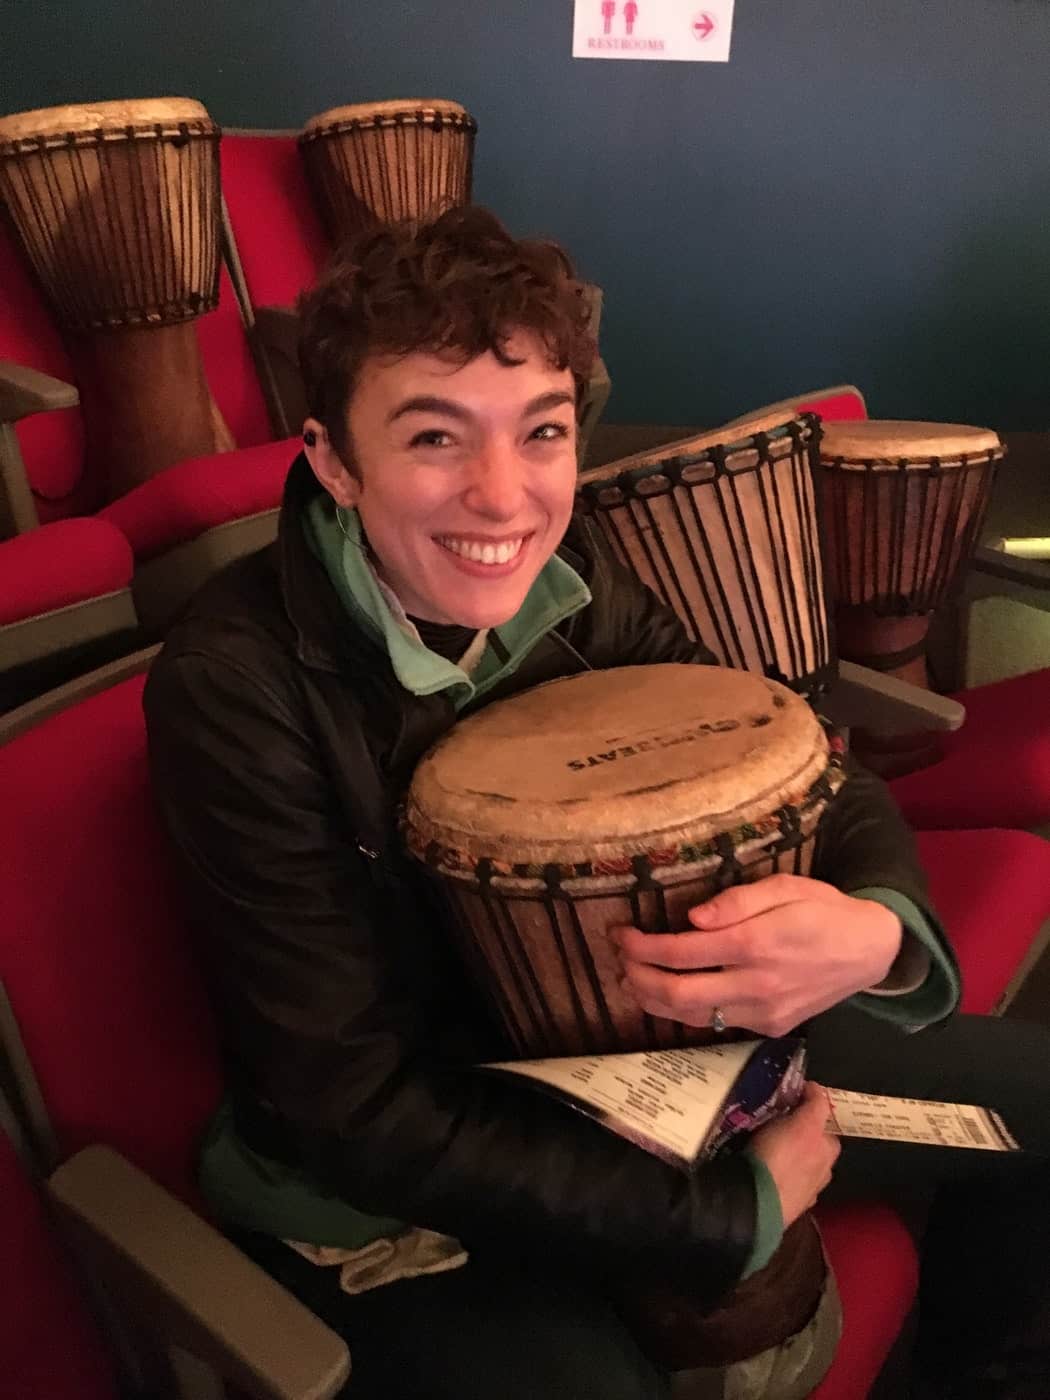 Smiling young woman holding a bongo drum in theatre seats with drums all around